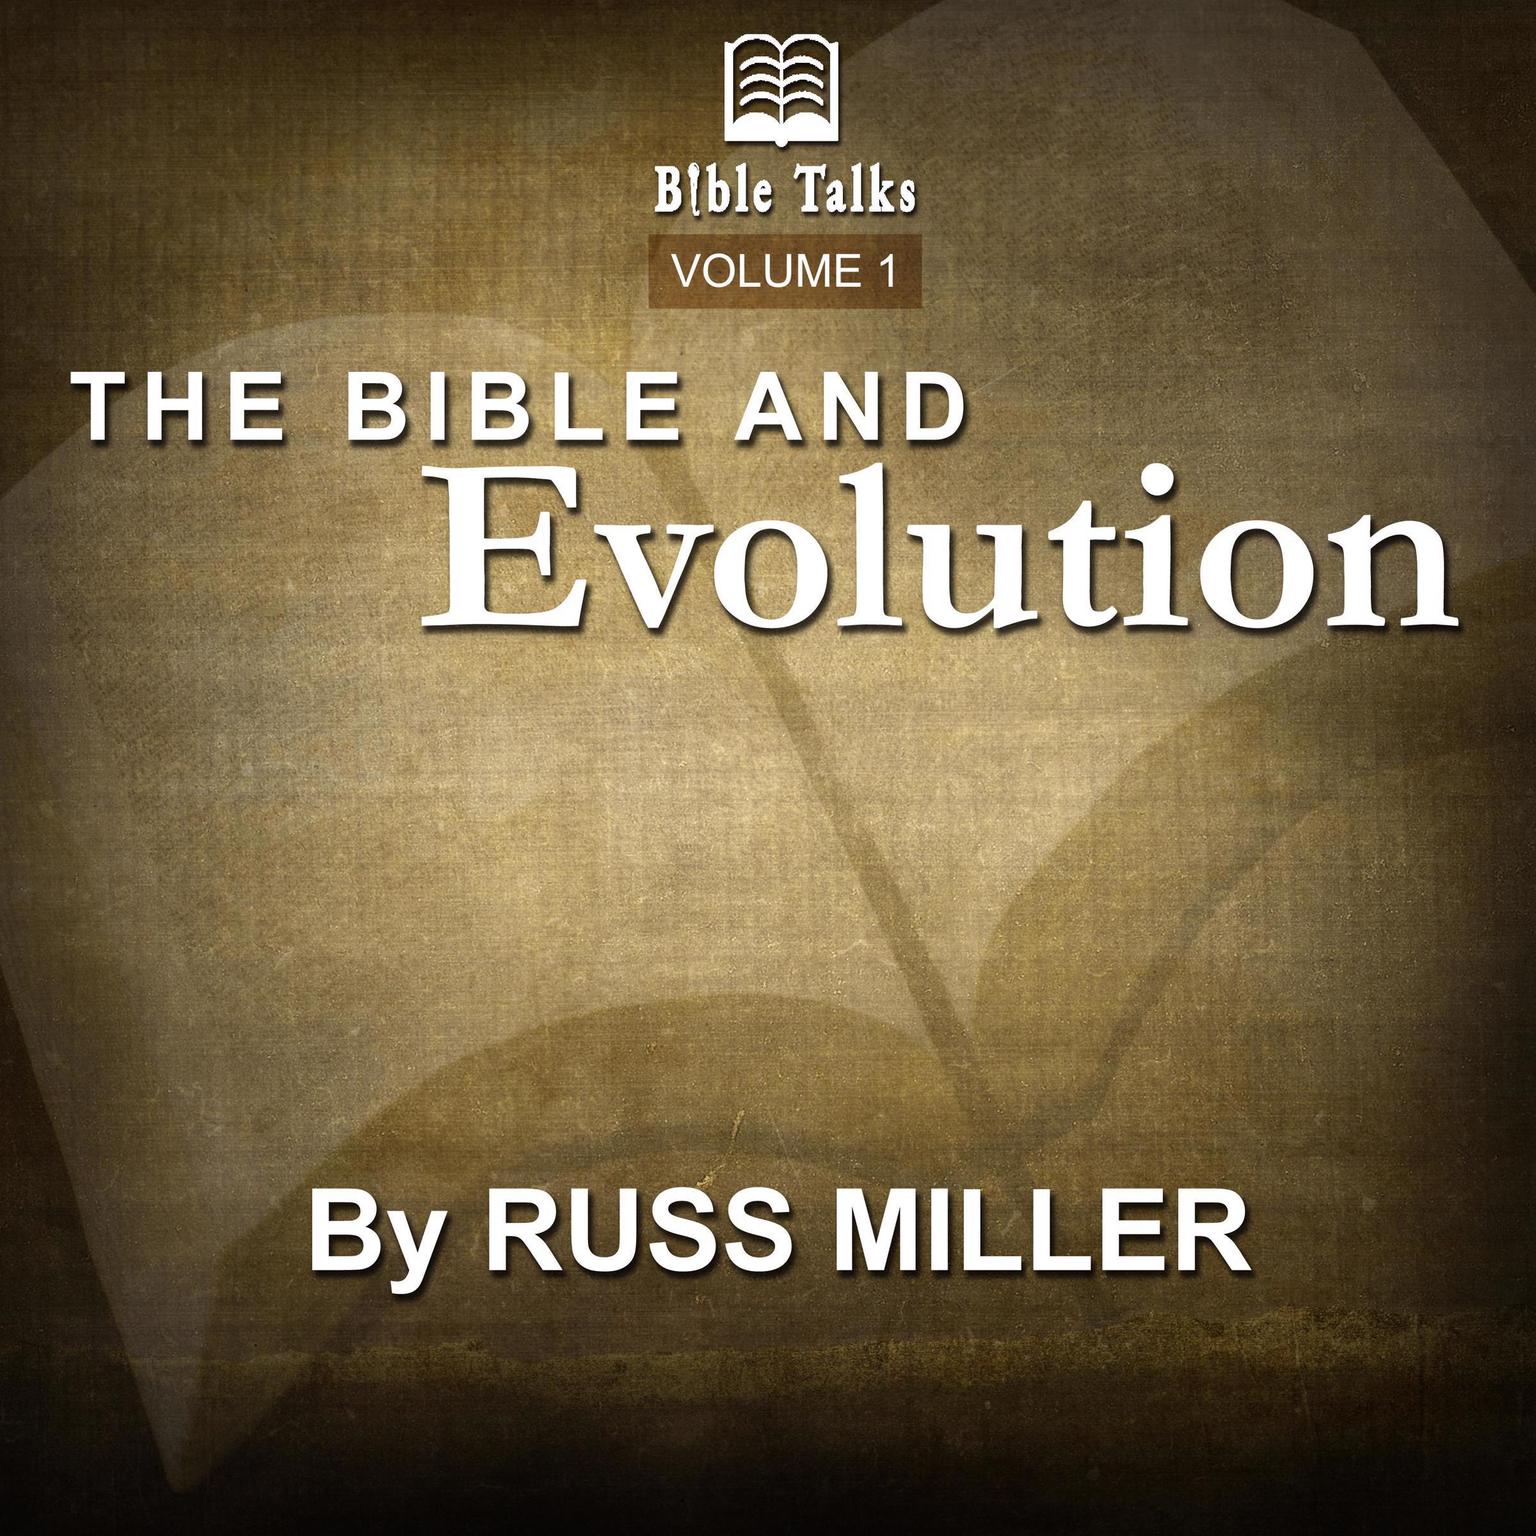 The Bible And Evolution - Volume 1 Audiobook, by Russ Miller